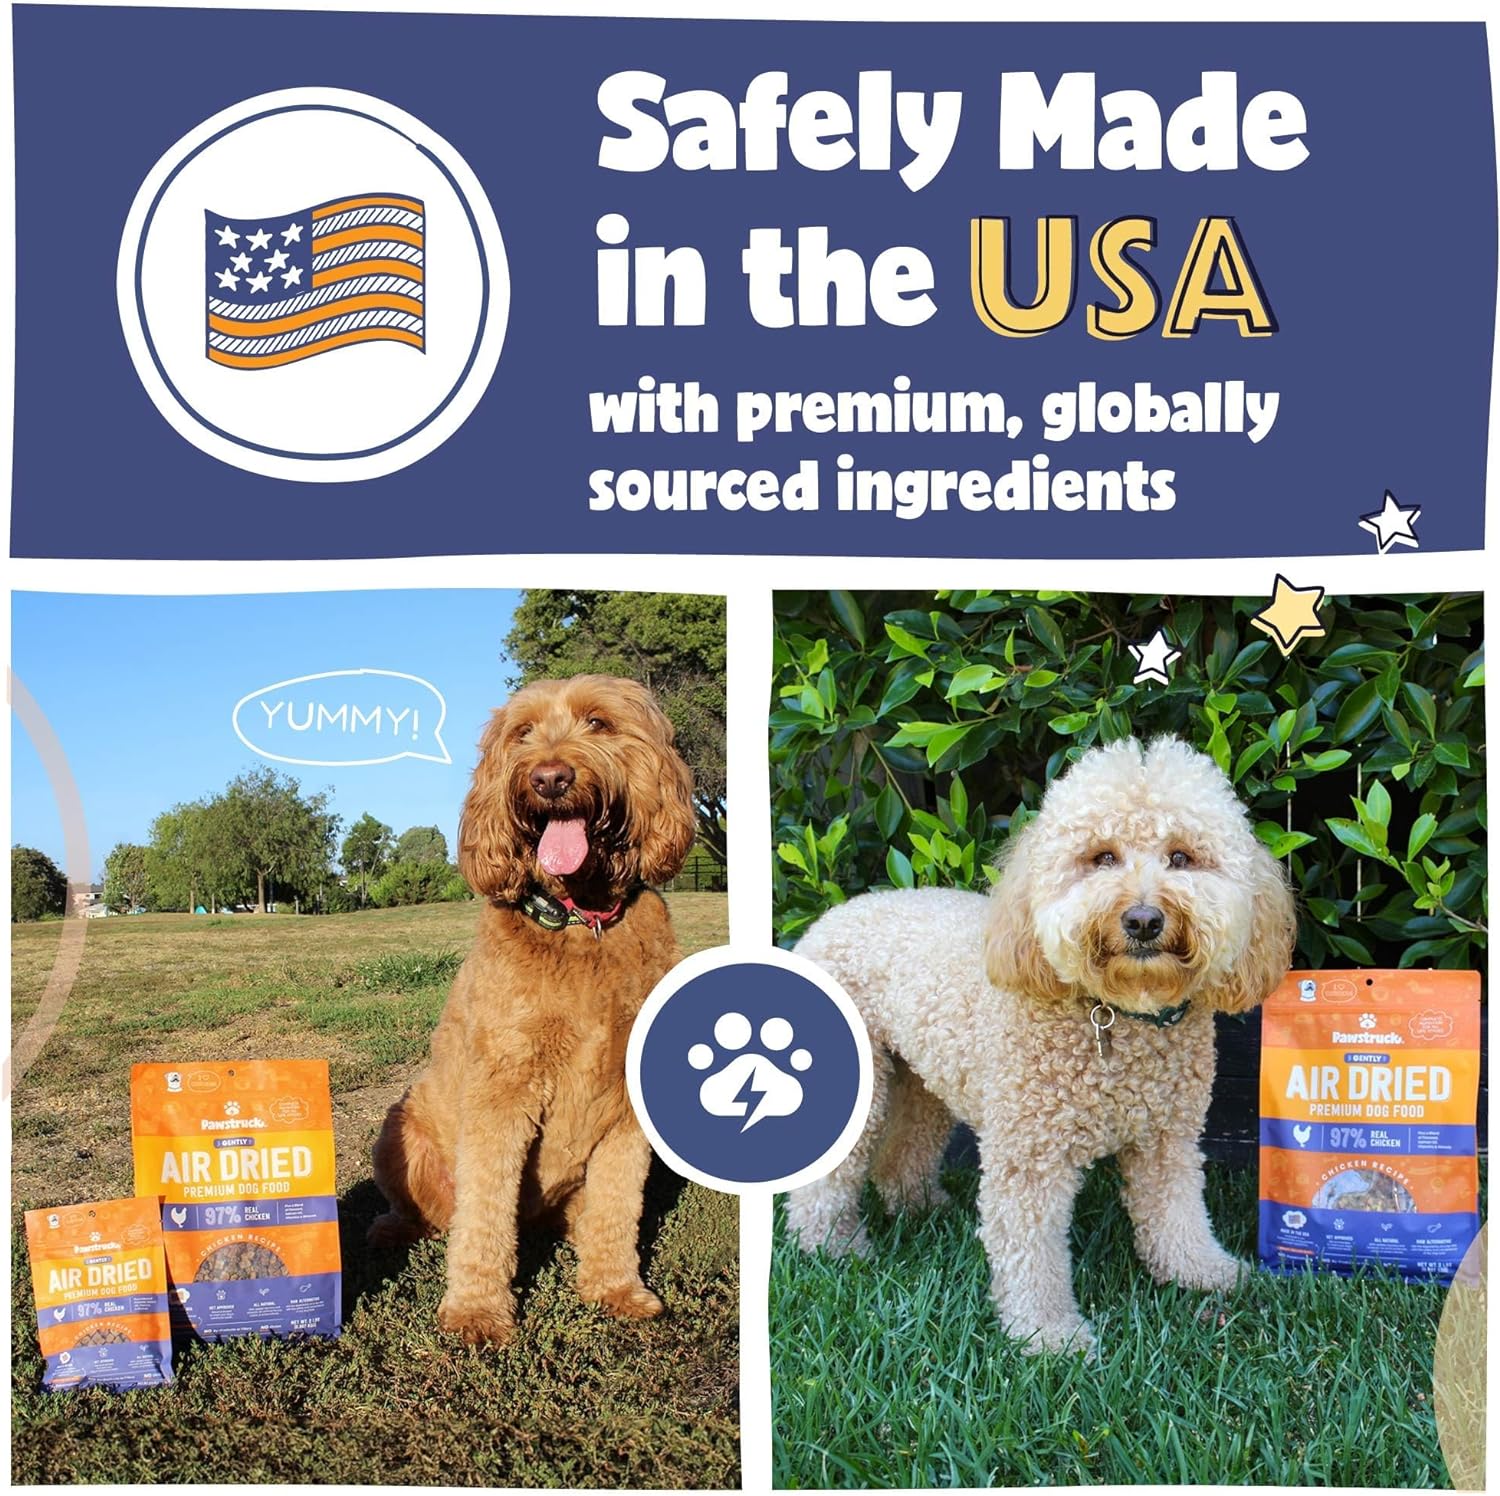 Pawstruck All Natural Air Dried Dog Food w/Real Chicken - Grain Free, Made in USA, Non-GMO & Vet Recommended - High Protein Limited Ingredient Full-Feed - for All Breeds & Ages - 2.5oz Trial Bag : Pet Supplies